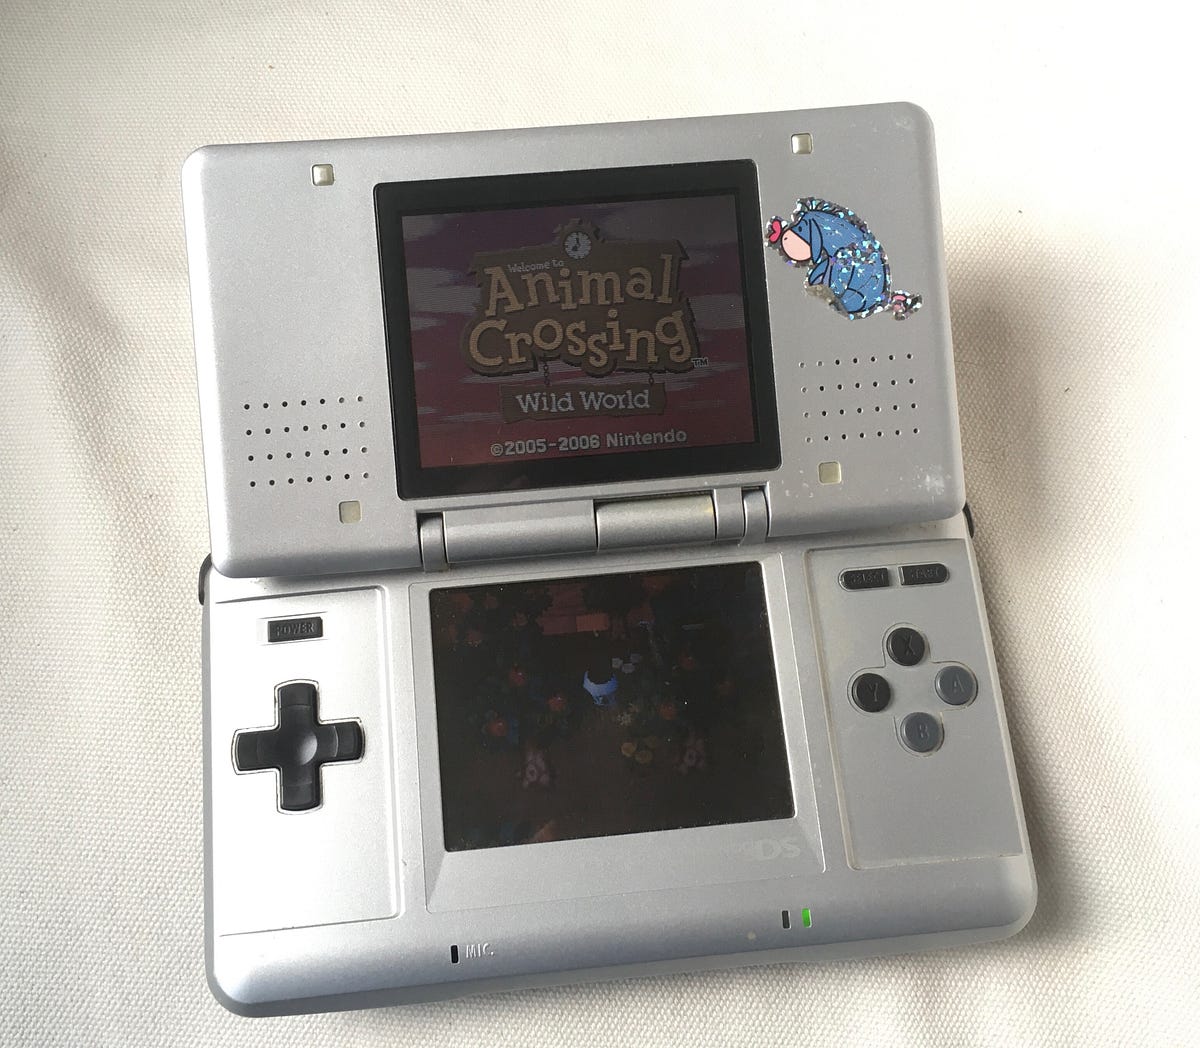 314: The Nintendo DS. Escaping into Animal Crossing nostalgia | by Katie  Harling-Lee | Objects | Medium